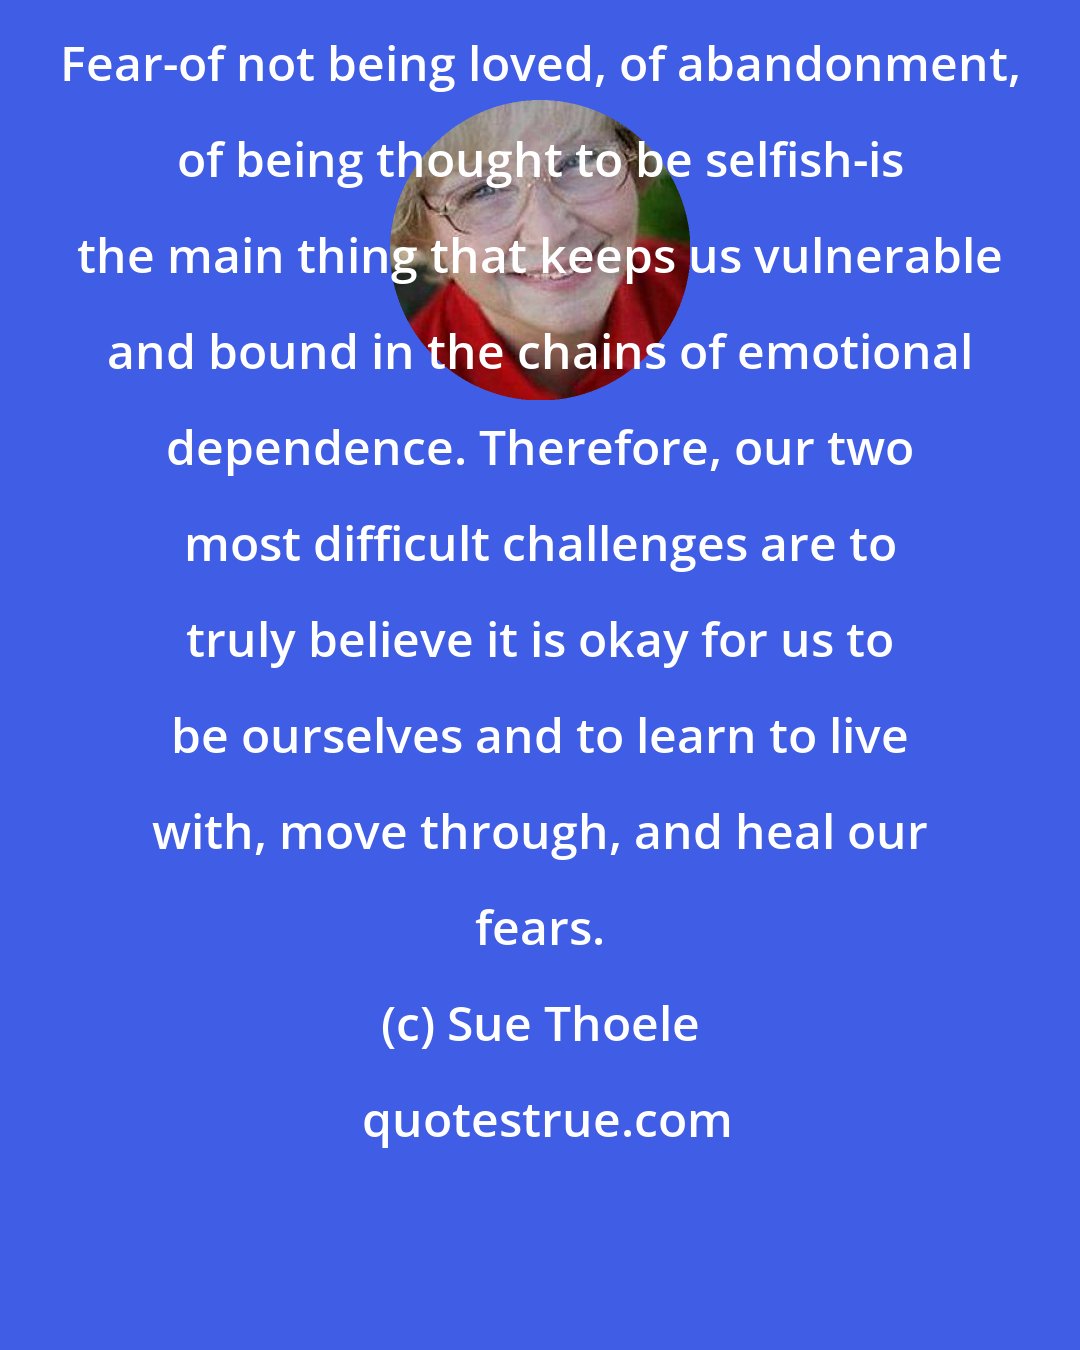 Sue Thoele: Fear-of not being loved, of abandonment, of being thought to be selfish-is the main thing that keeps us vulnerable and bound in the chains of emotional dependence. Therefore, our two most difficult challenges are to truly believe it is okay for us to be ourselves and to learn to live with, move through, and heal our fears.